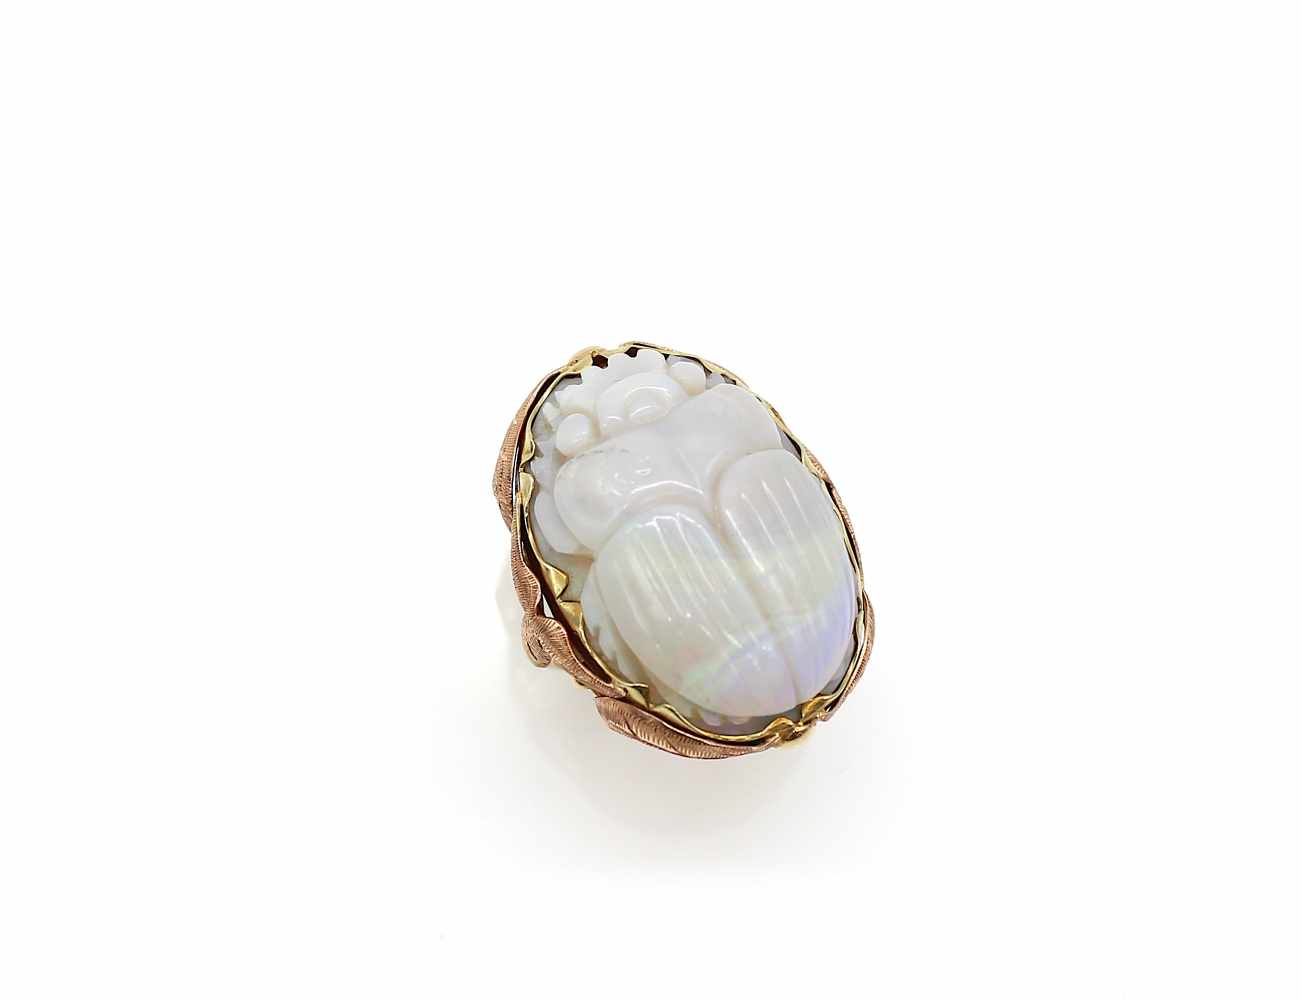 Ring in 585 gold with an opal in the shape of a scarab.Weight 12,2 g, size 55, opal dimensions :